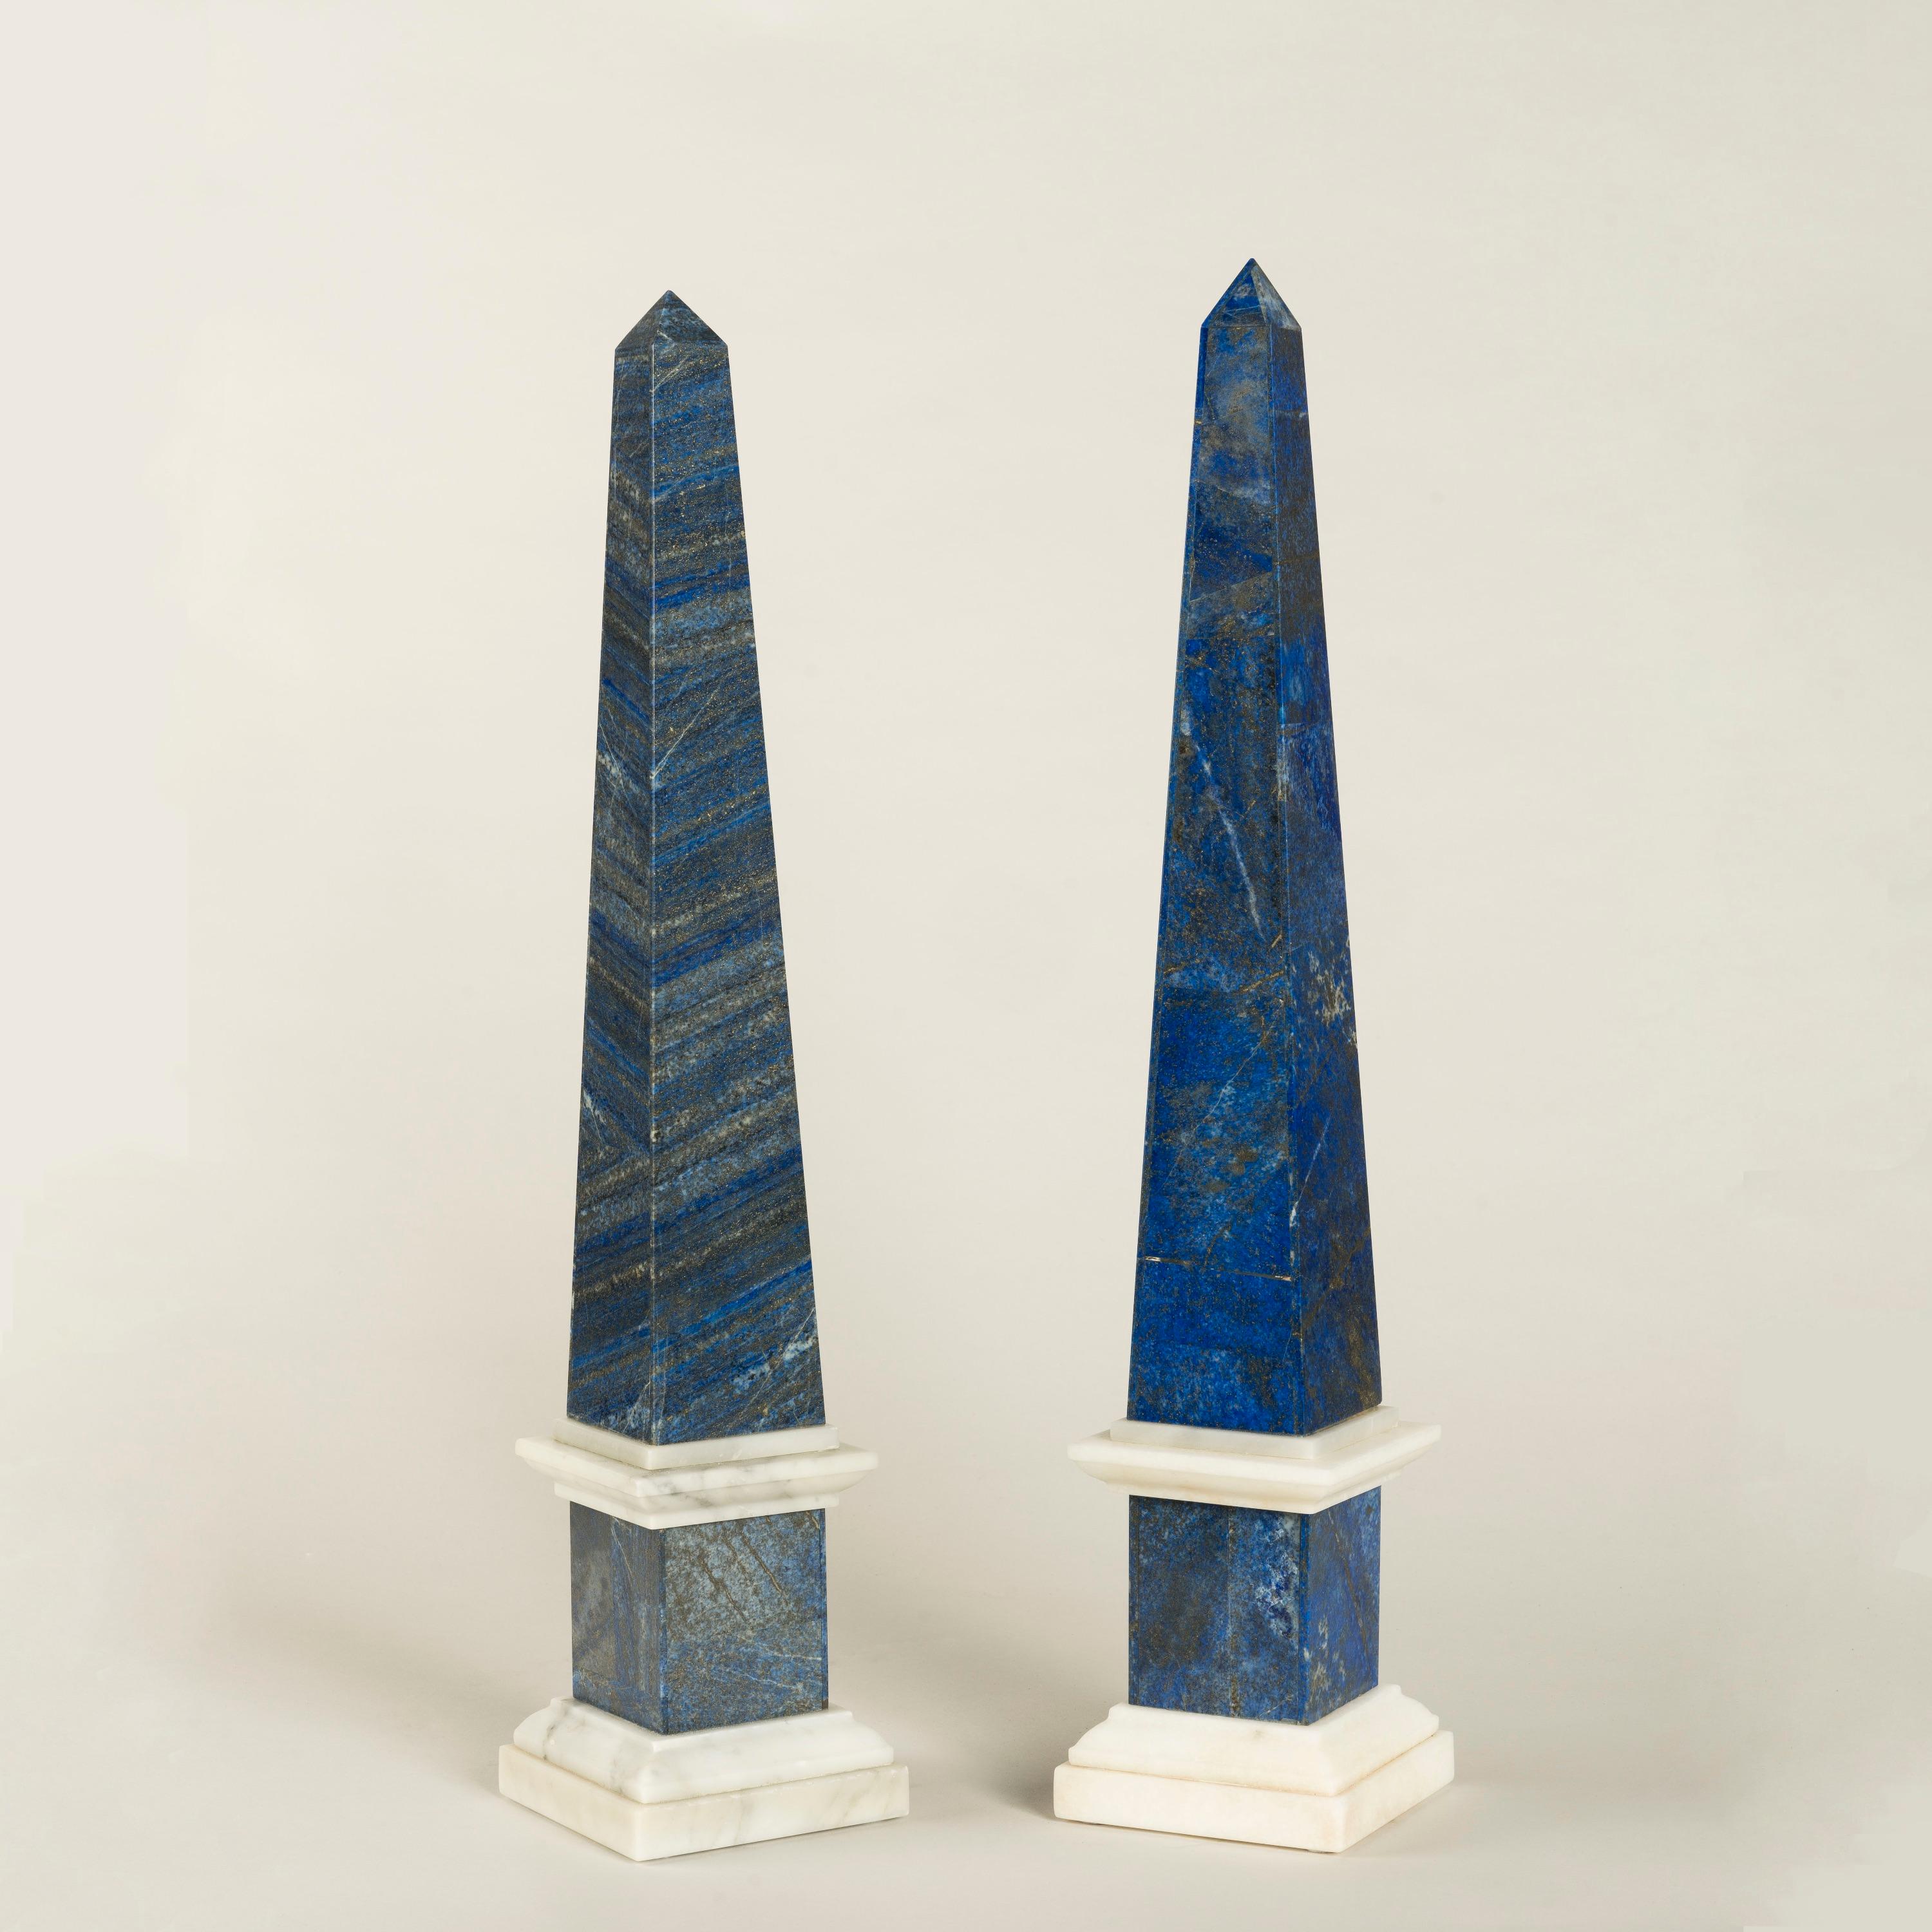 A Near Pair of Lapis Lazuli Obelisks

Veneered with the rare and semi-precious deep blue lapis admired for its intense colour, each obelisk with Carrara marble bases and moulding.
Probably Venetian, circa 1870

Lapis lazuli, along with other